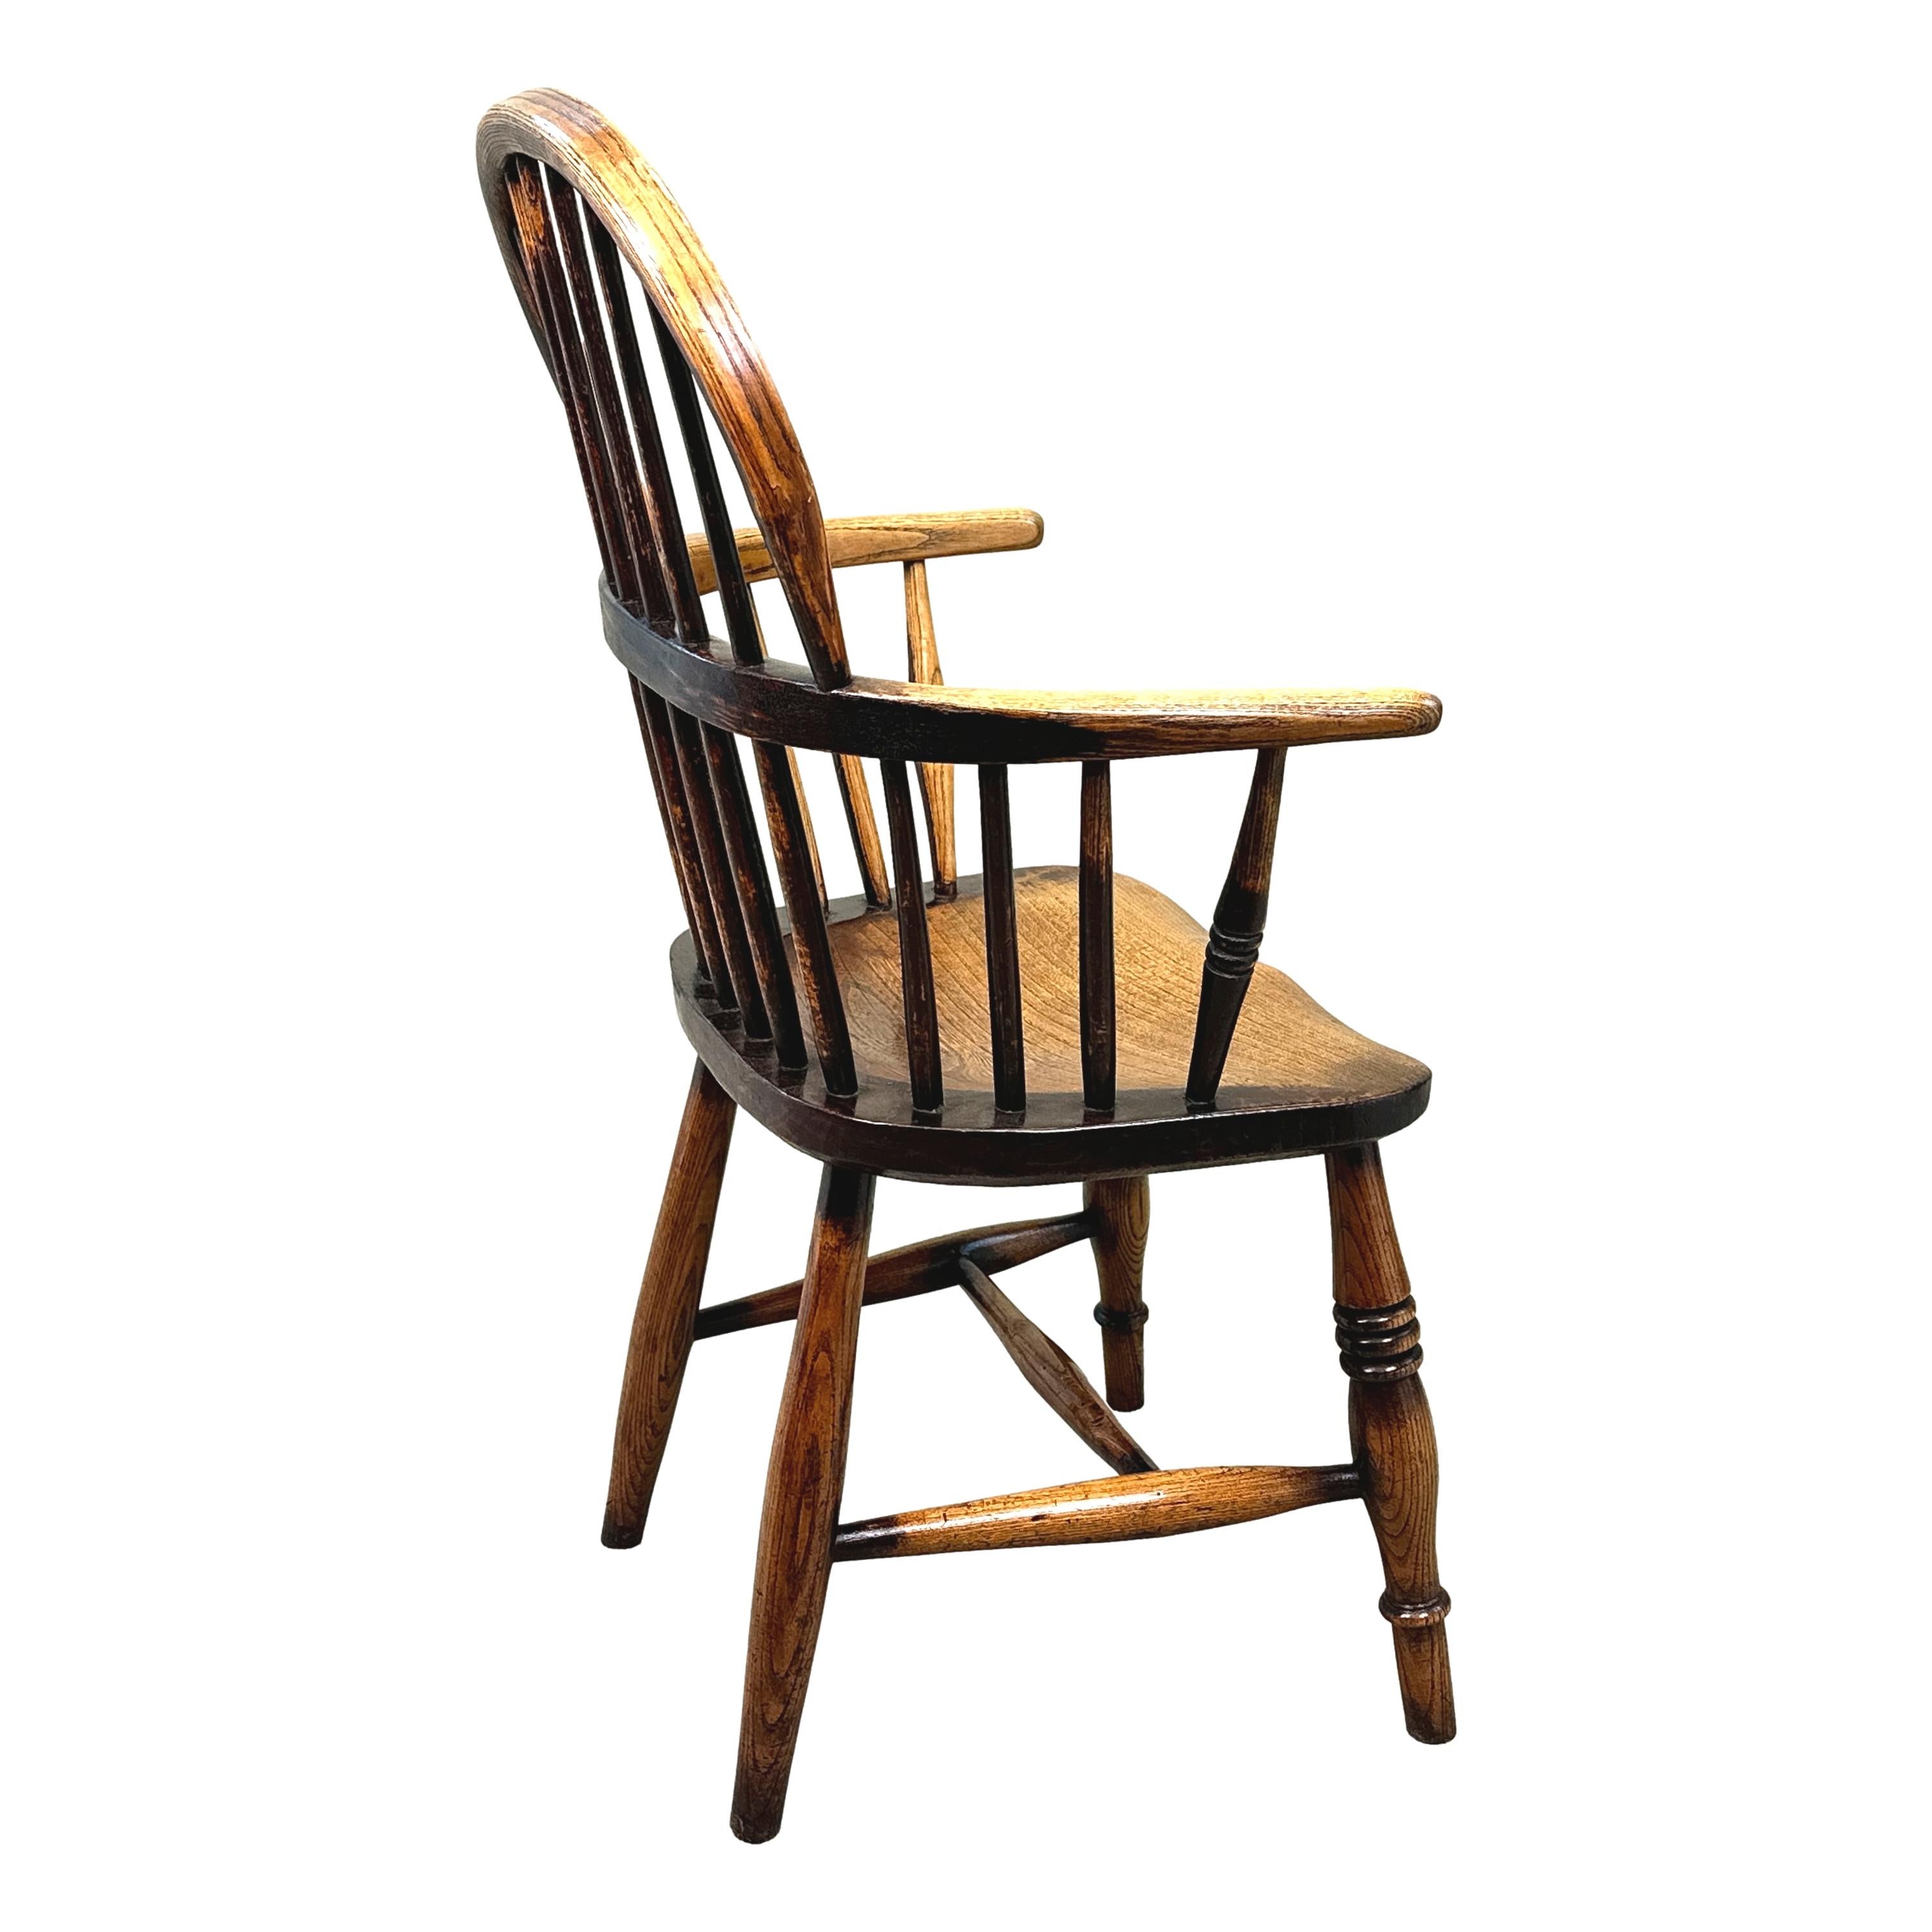 Victorian 19th Century Ash & Elm Childs Windsor Chair For Sale